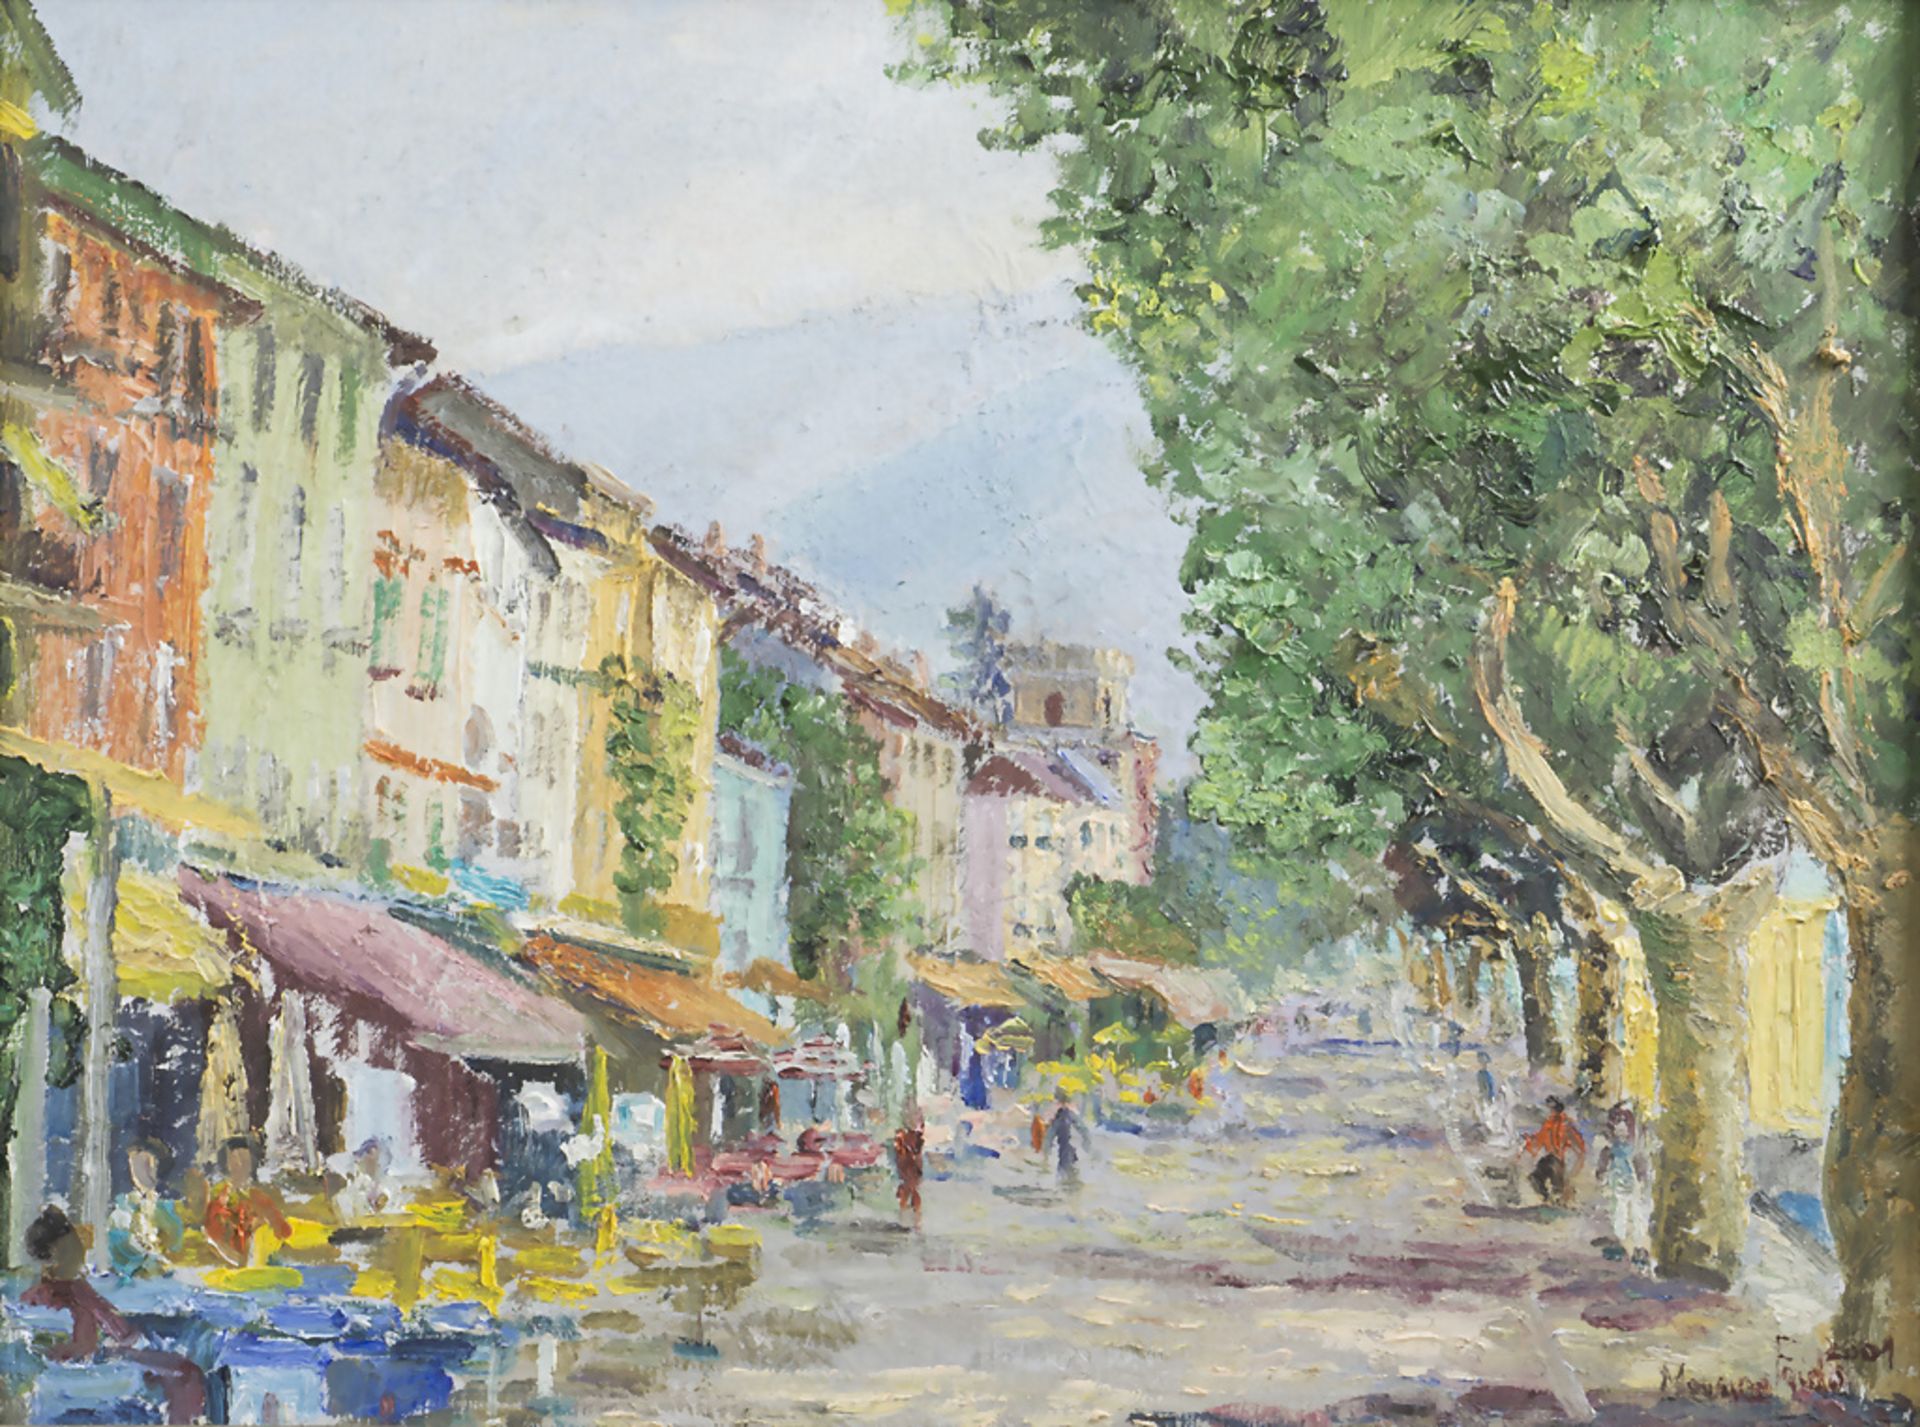 Maurice FRIDO (*1926), 'Sommertag in Ascona' / 'A summer day in Ascona', 2001